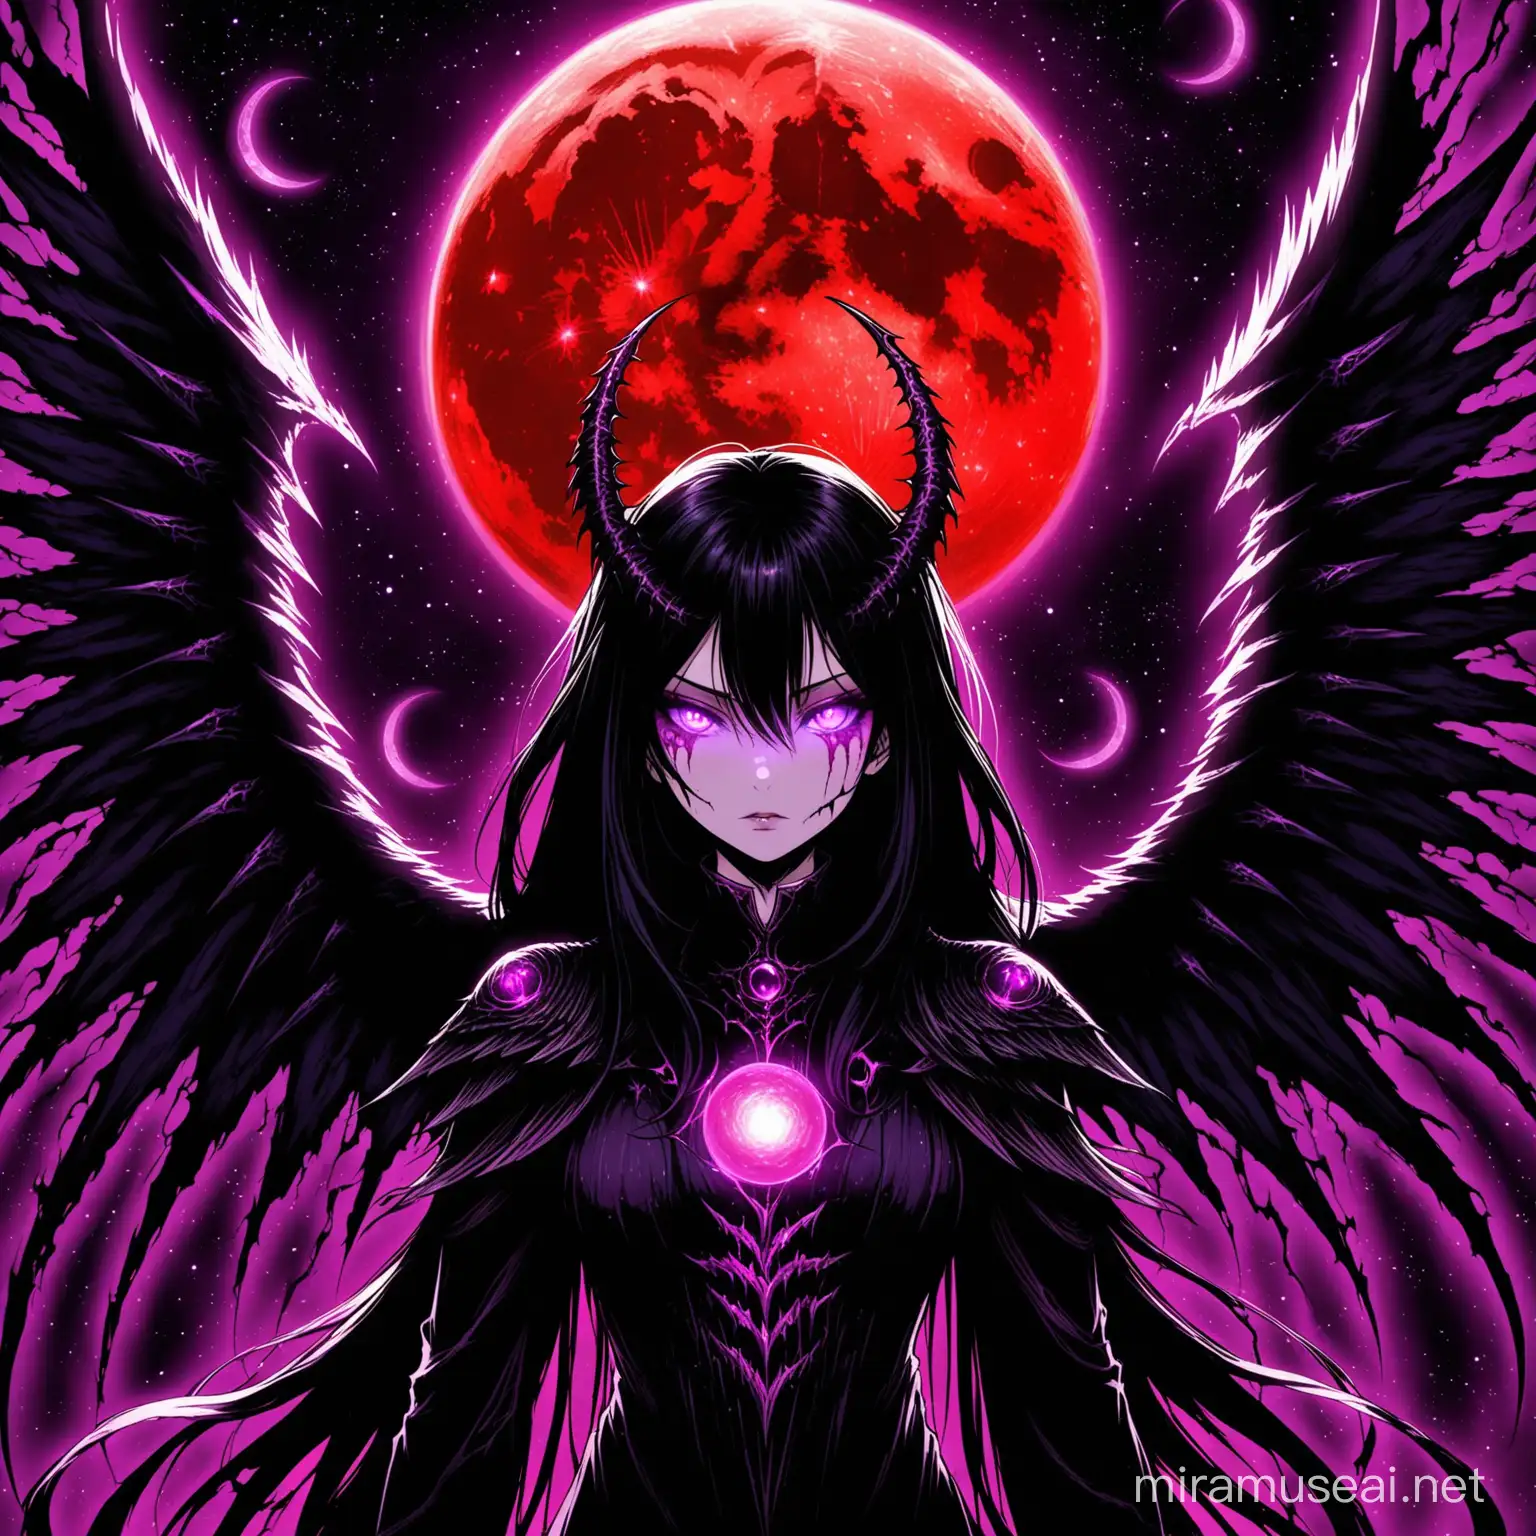 create an art woman being in space with a red moon in a background, woman is an eldritch angel, has a pair of large wings, has one big demonic thorn, has purple glowing eyes, has half of her face covered in scars, looks directly into camera, dark fantasy, anime style